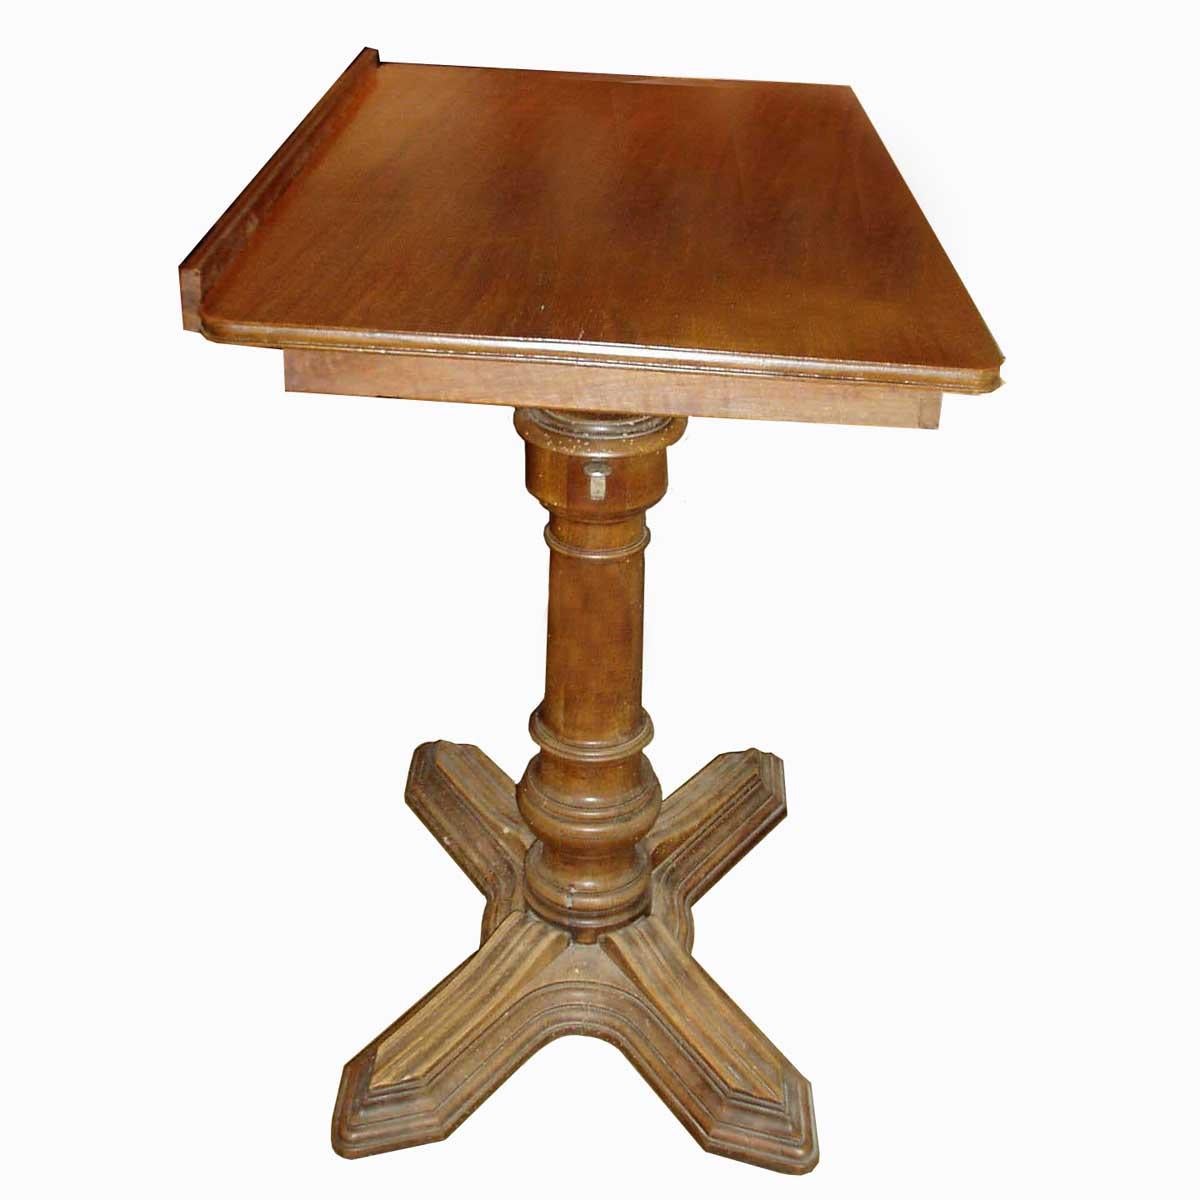 Conceived by E. Chouanard, one of the most respected French engineers and designers of the 19th century, this elegant and metamorphic table, dubbed Soleil and made entirely of walnut, can serve as a side table, a nightstand or an easel, with varying